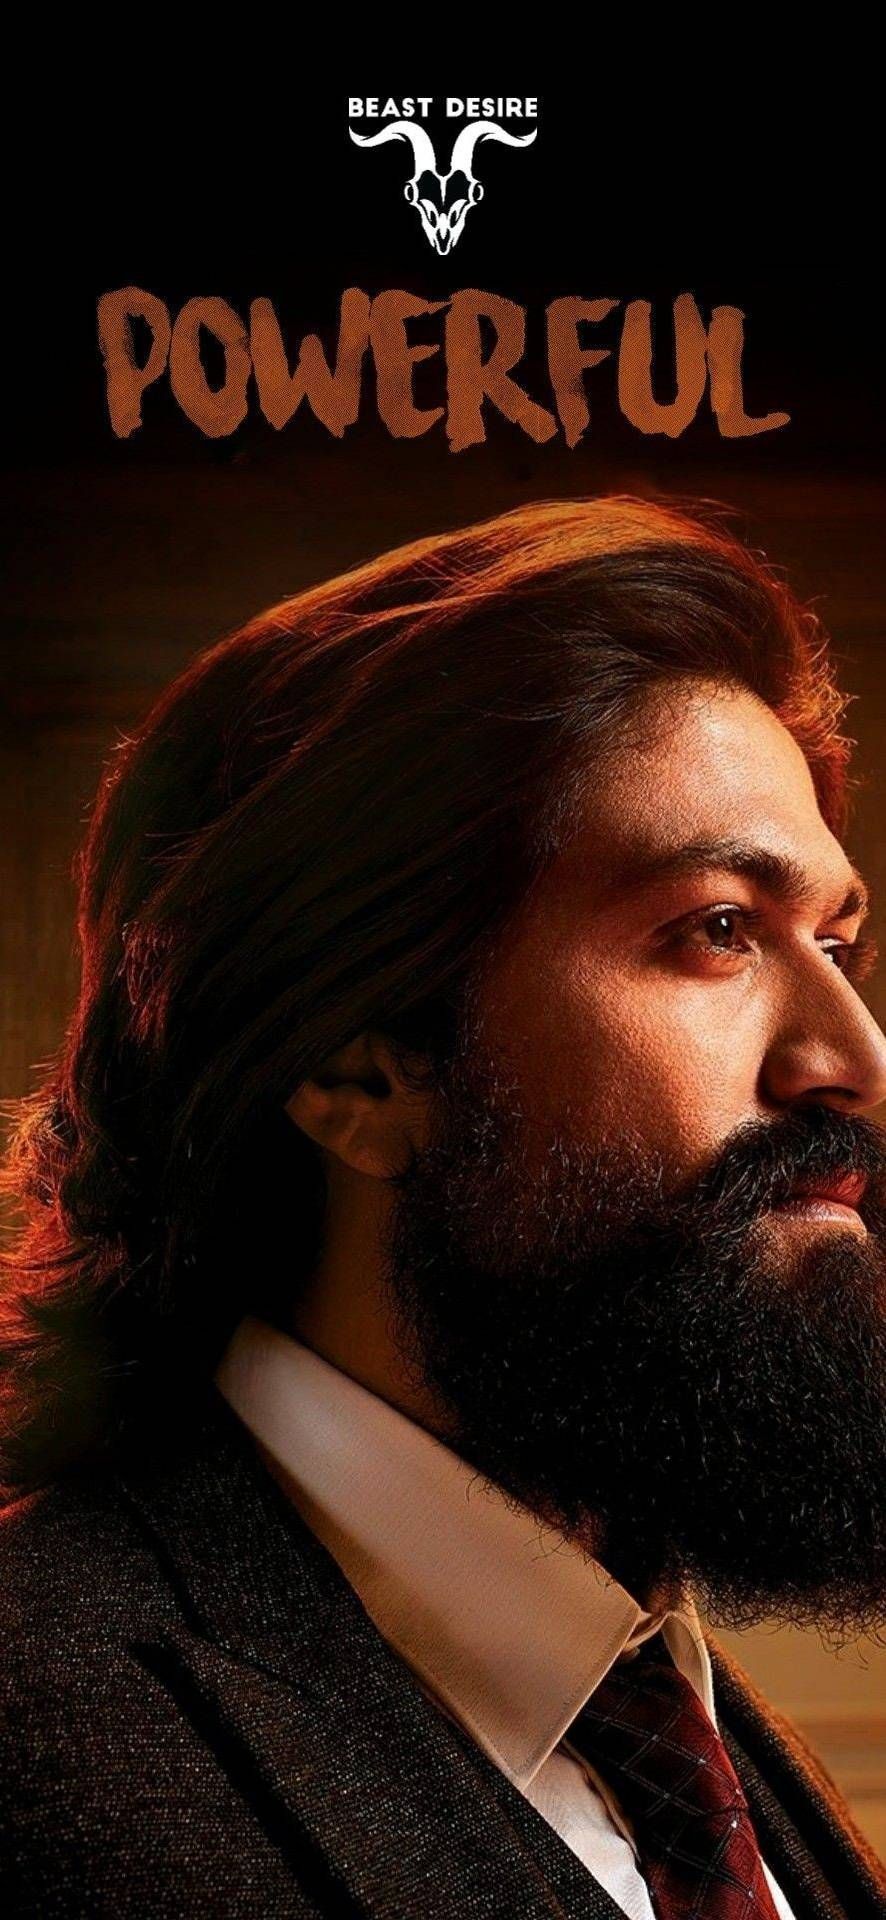 ᐅ KGF Wallpaper HD Download New Background Image Wallpaper. New background image, Actor photo, Actor picture